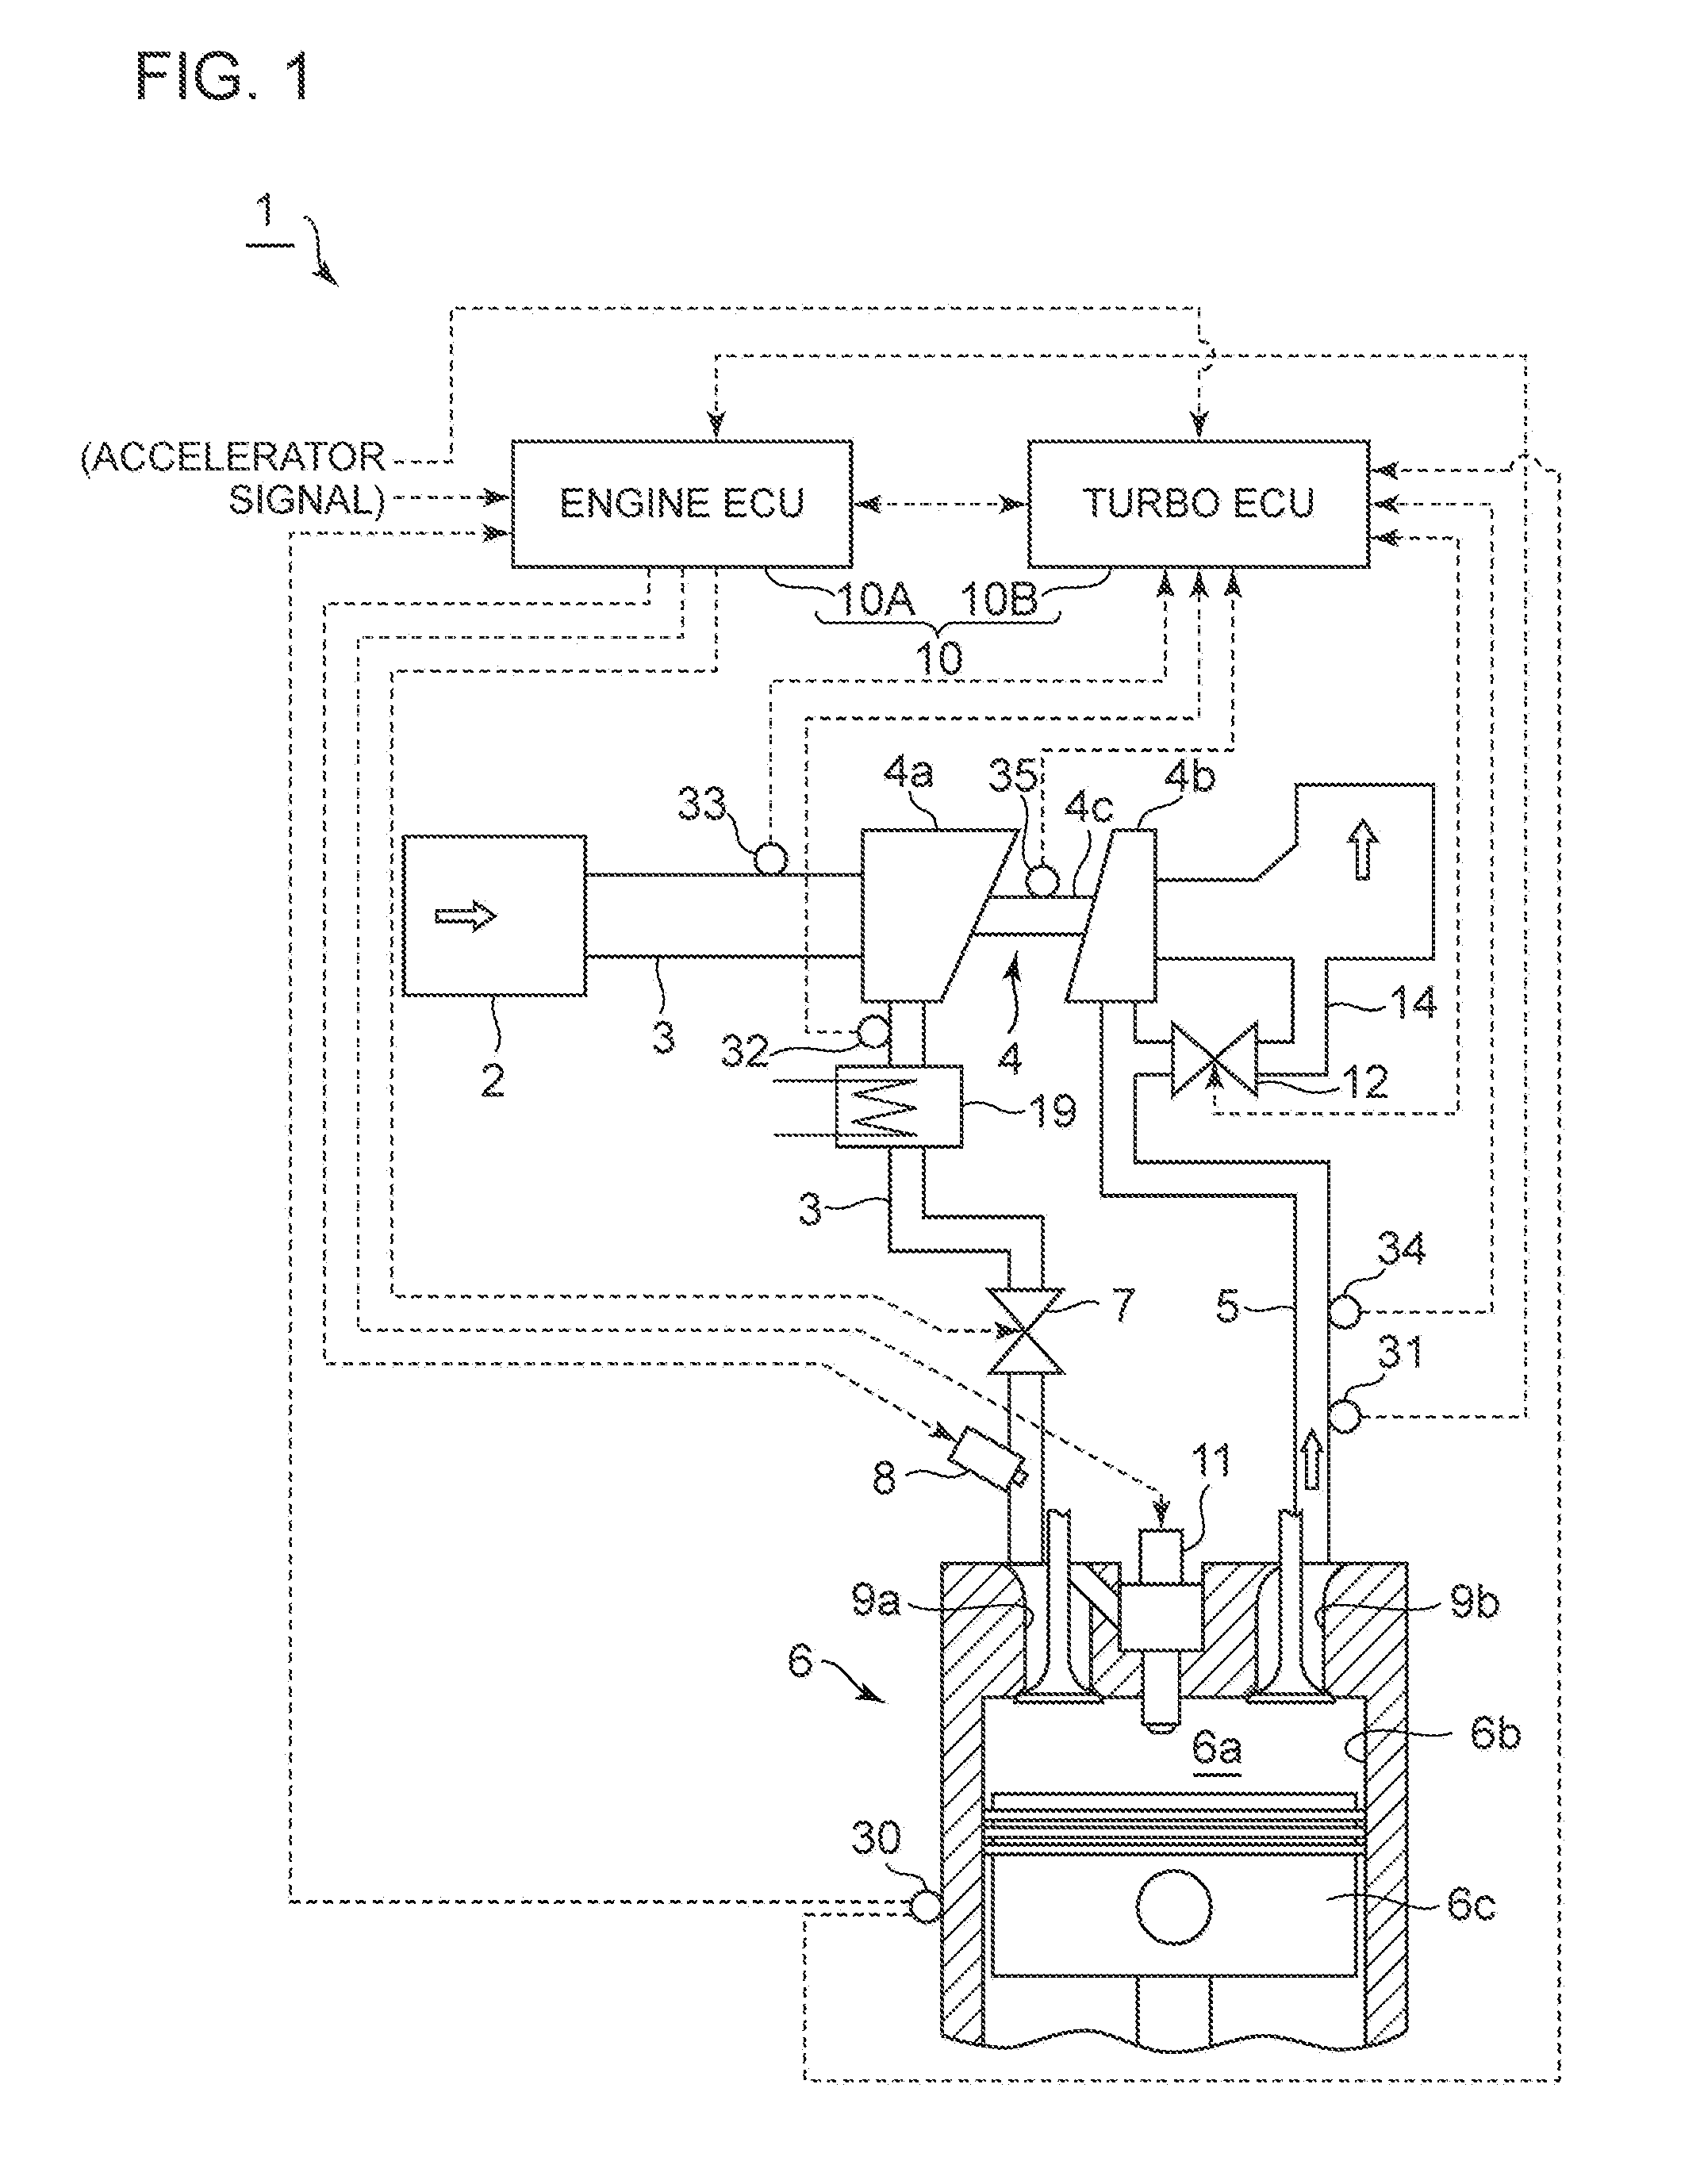 Control device for supercharging system